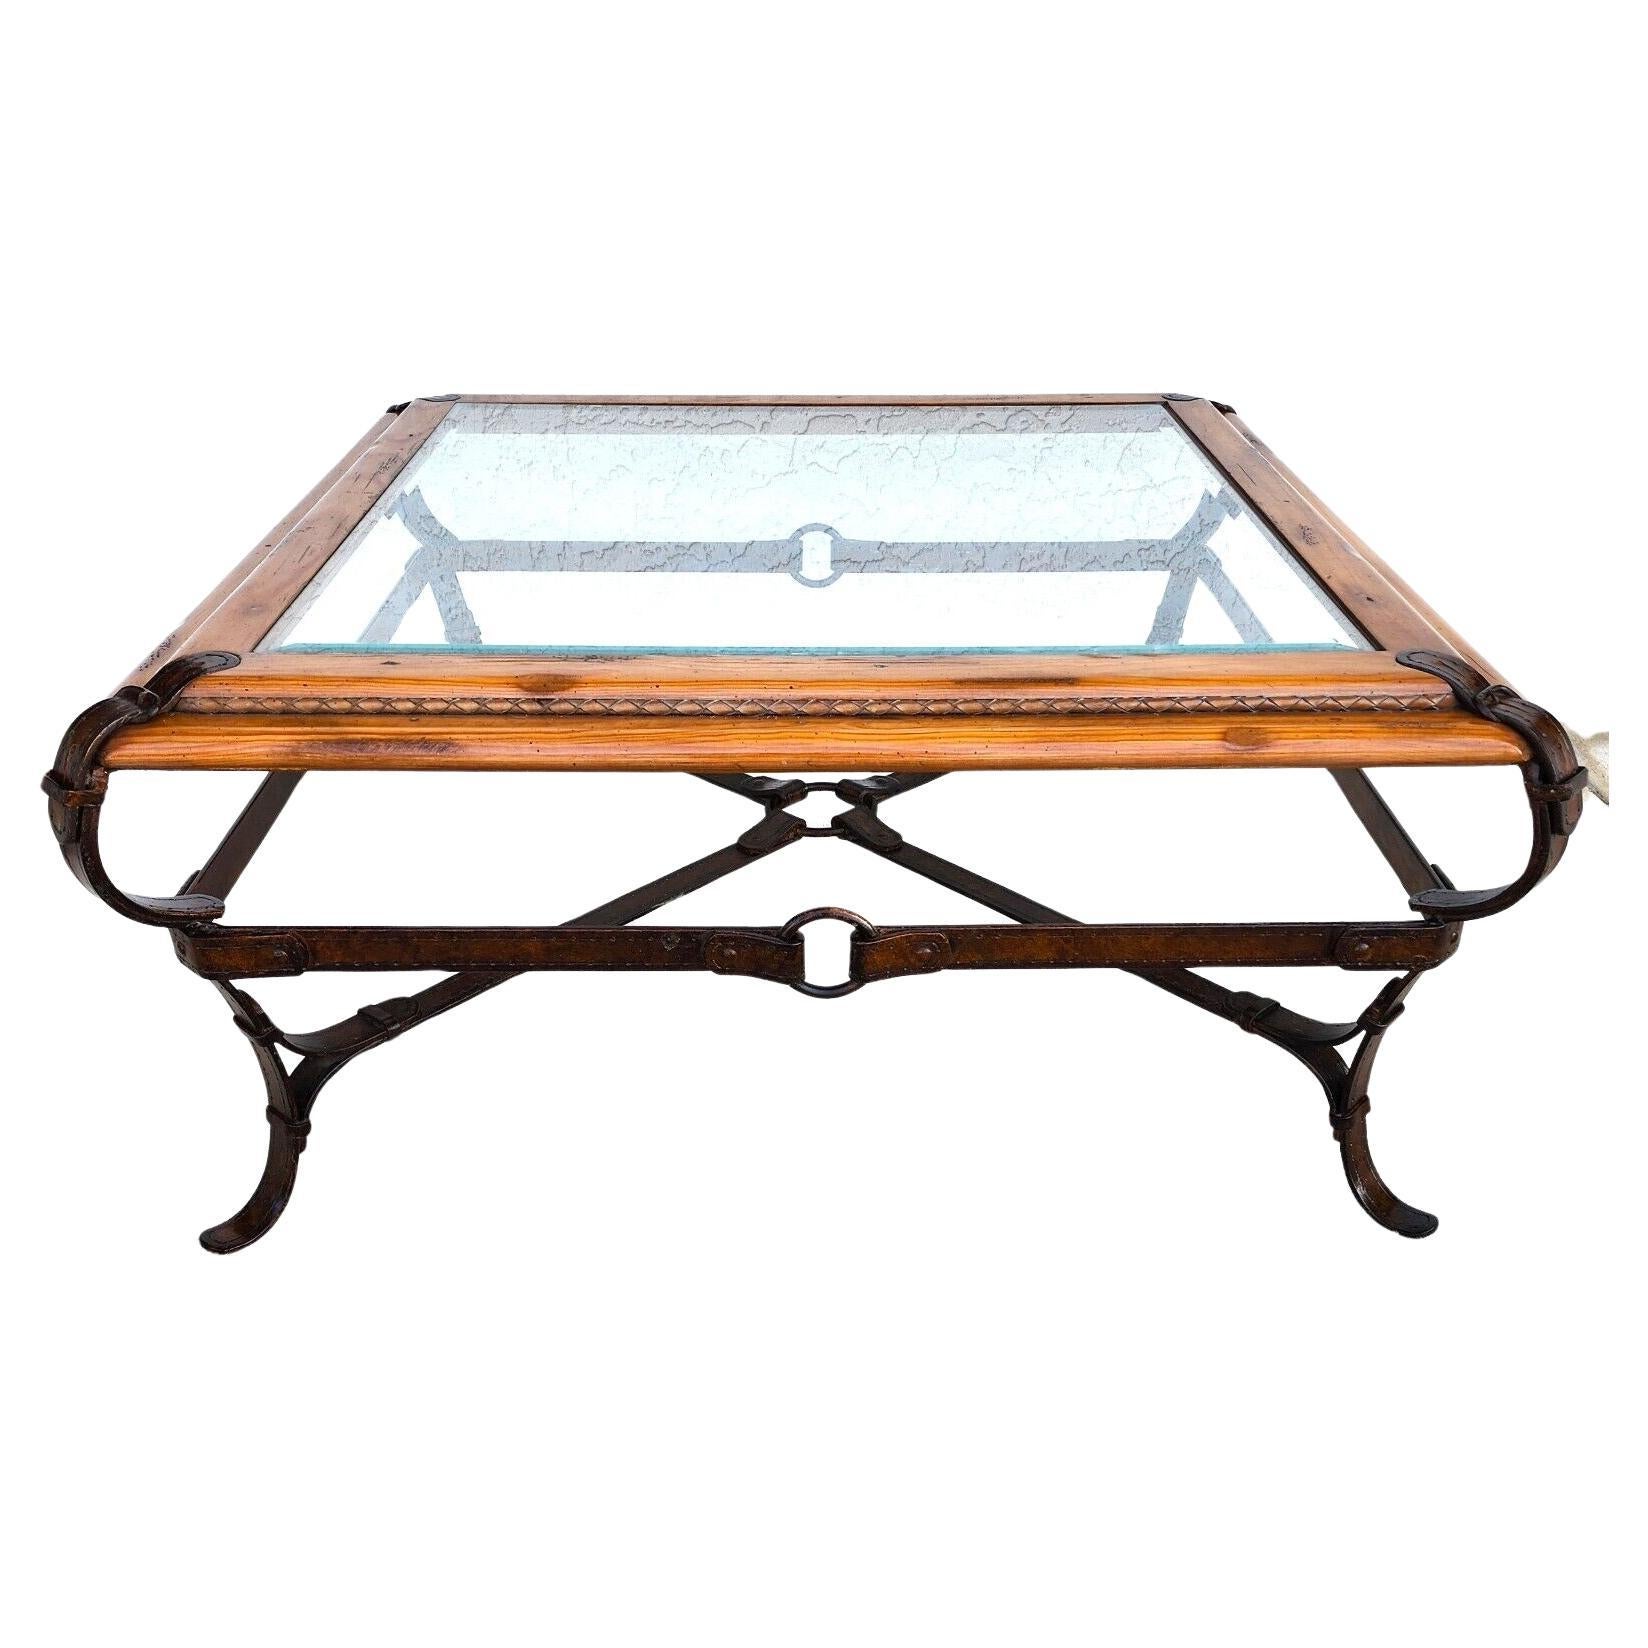 Adnet Hermes Style Coffee Table Equestrian Ranch Rustic For Sale